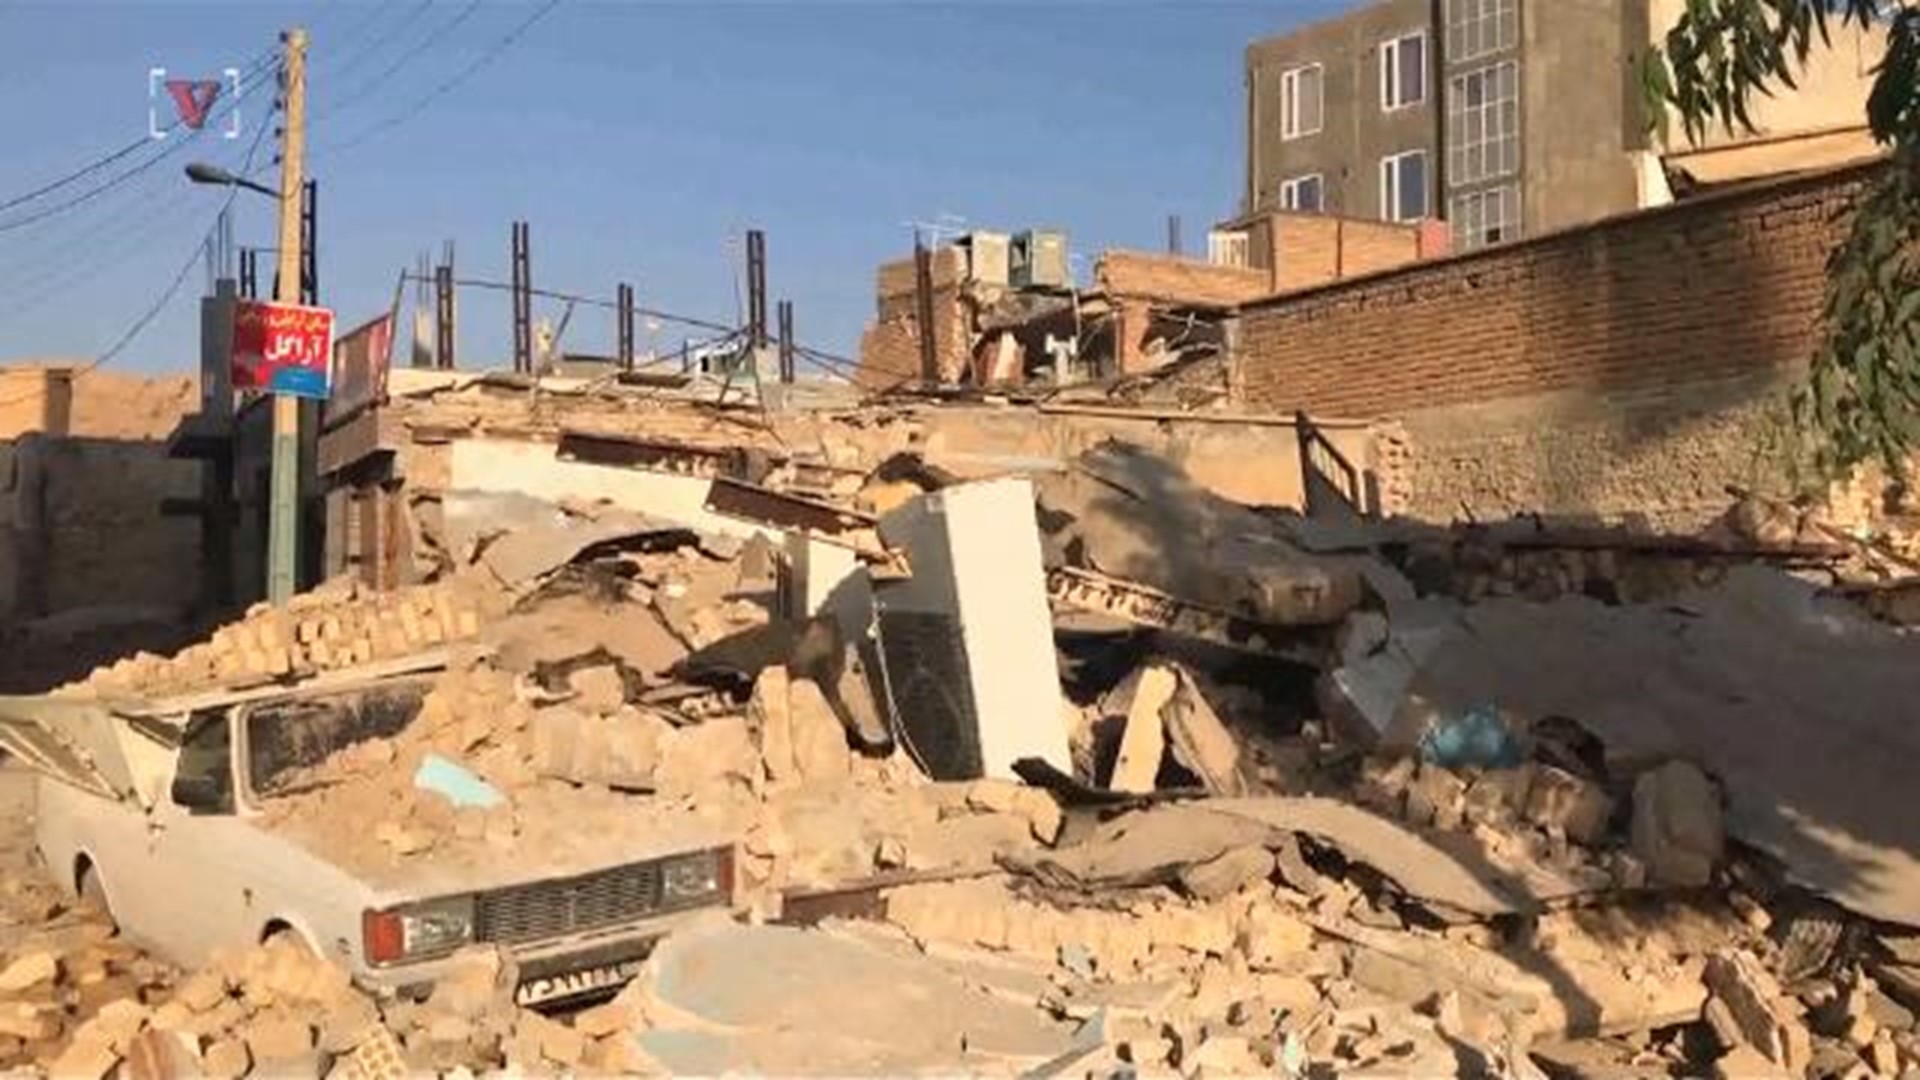 Scientists are predicting there could be a huge increase in the number of disastrous earthquakes in 2018.